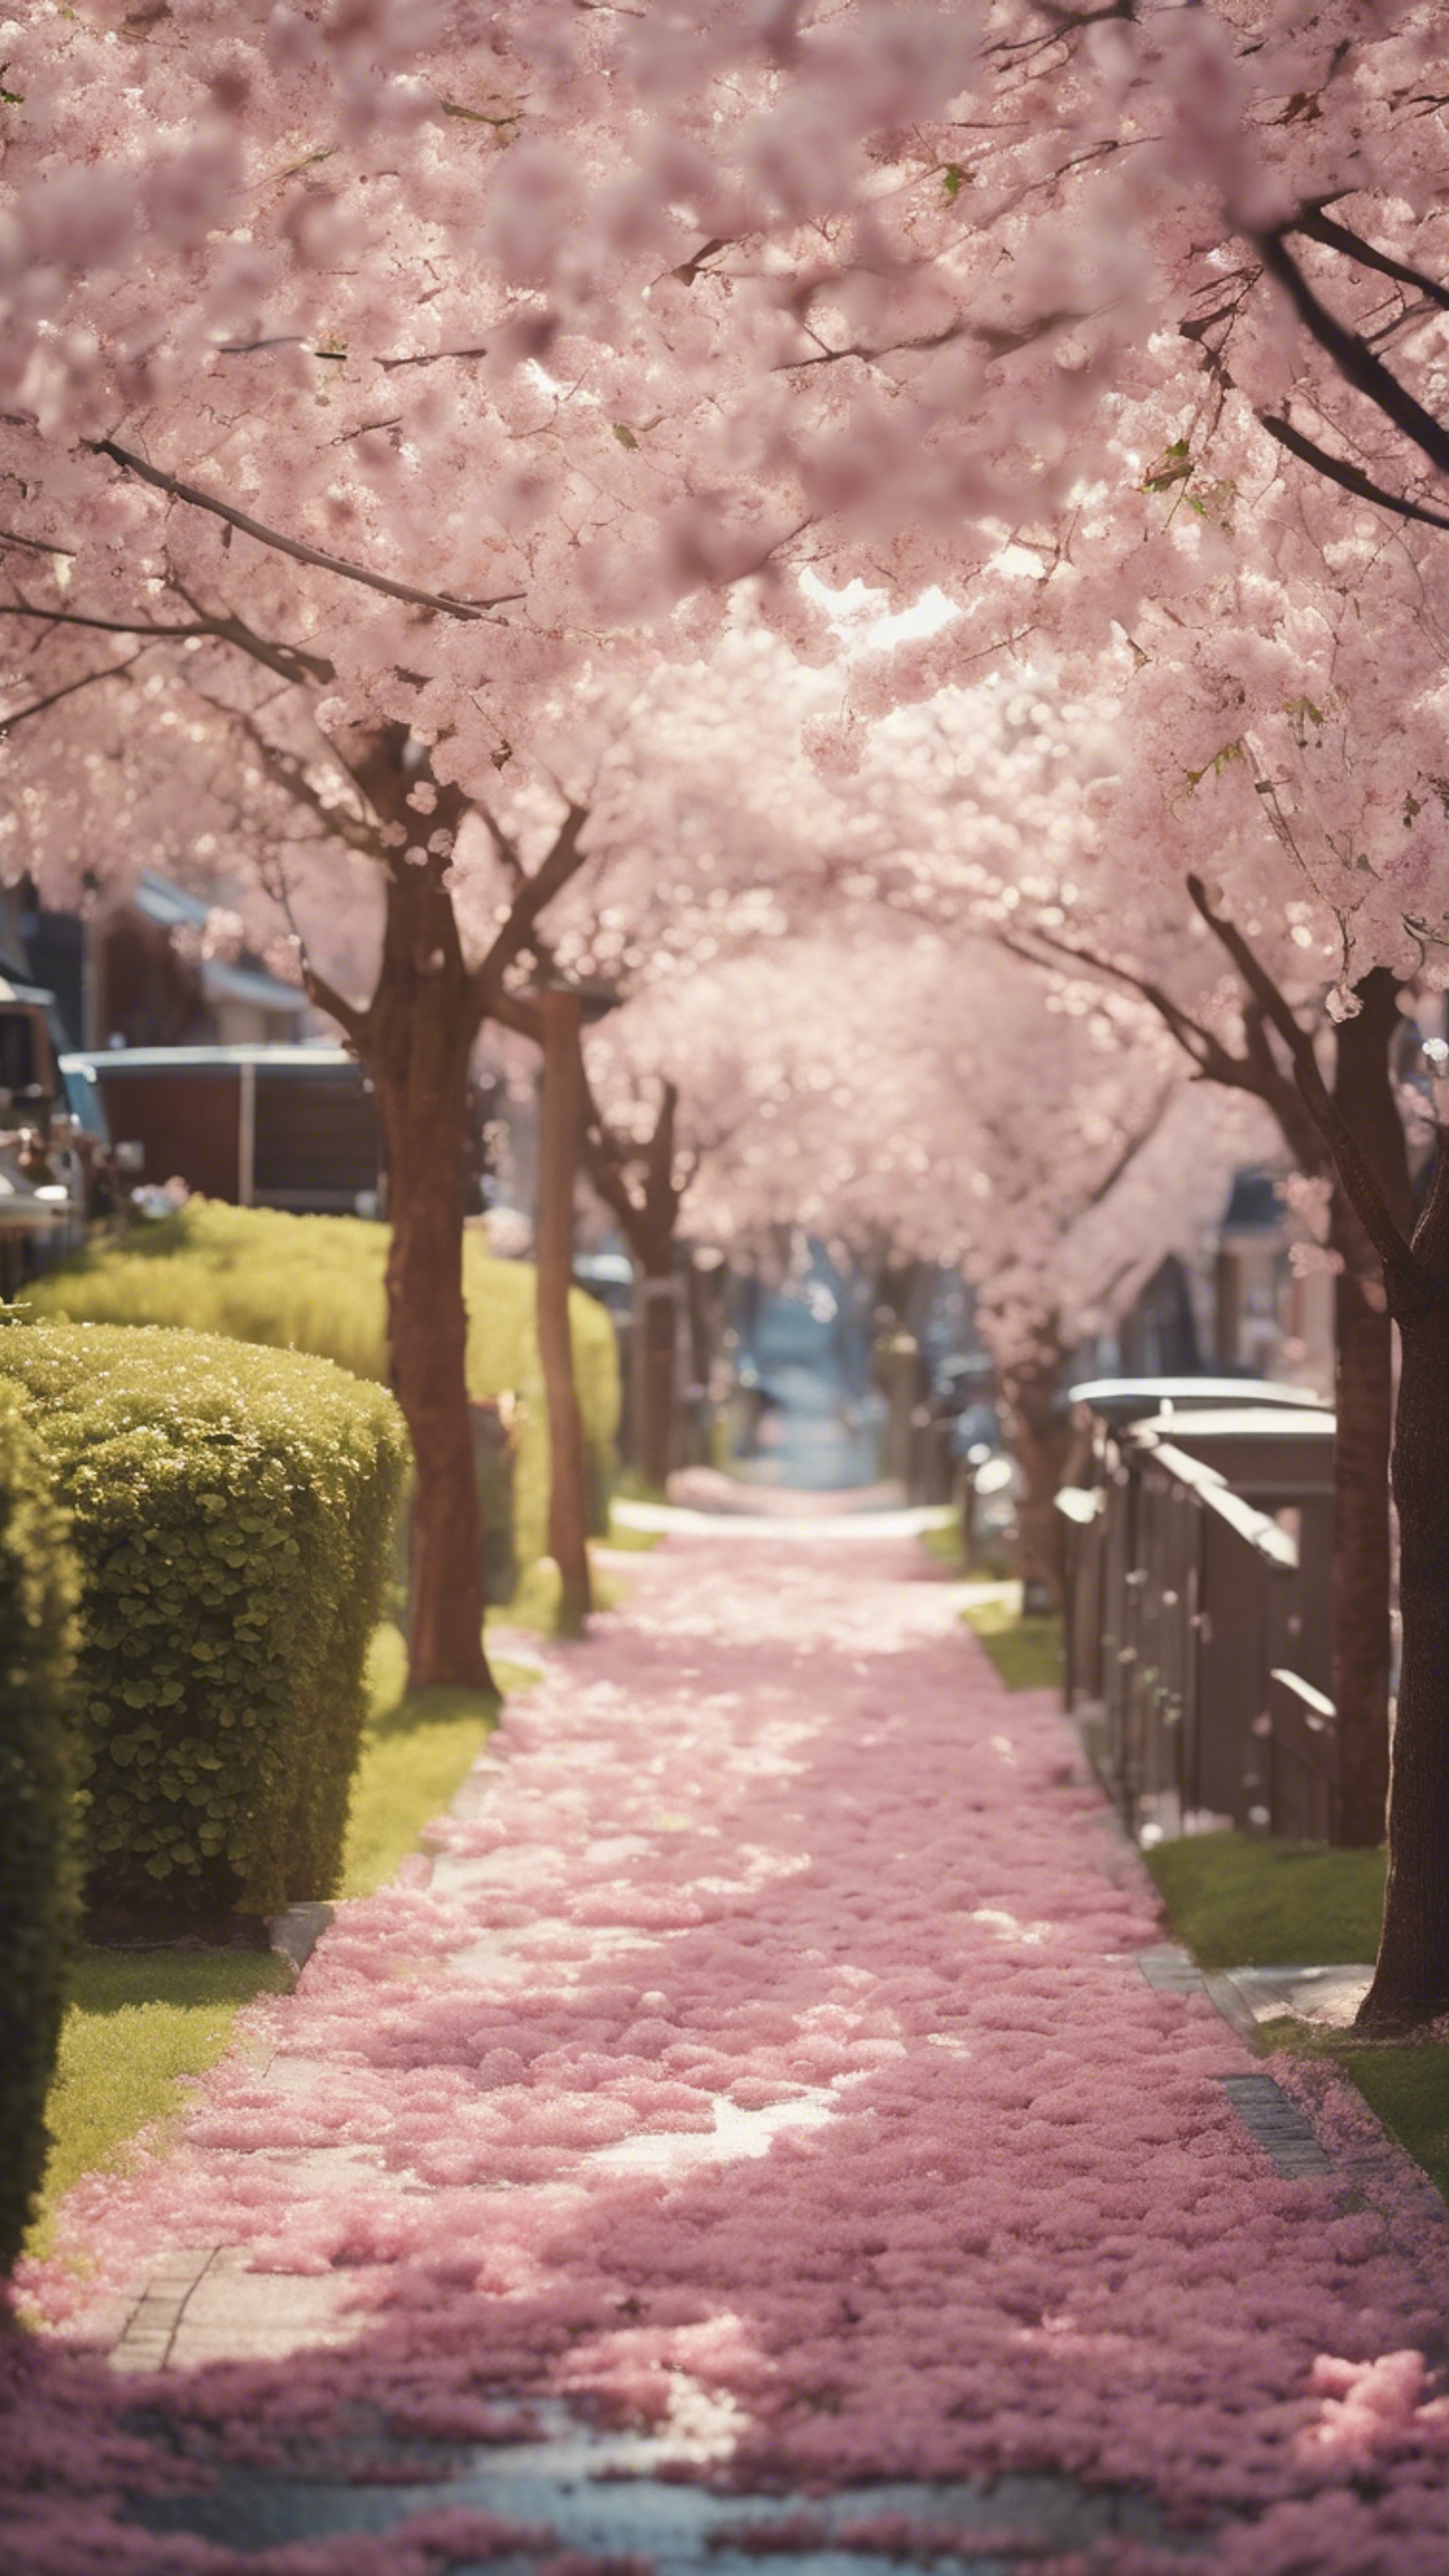 A suburban street lined with houses, and cherry blossom trees showering the pathway with petals, giving an ethereal feel to a sunny spring morning. Шпалери[d085be0bf6ea43718843]